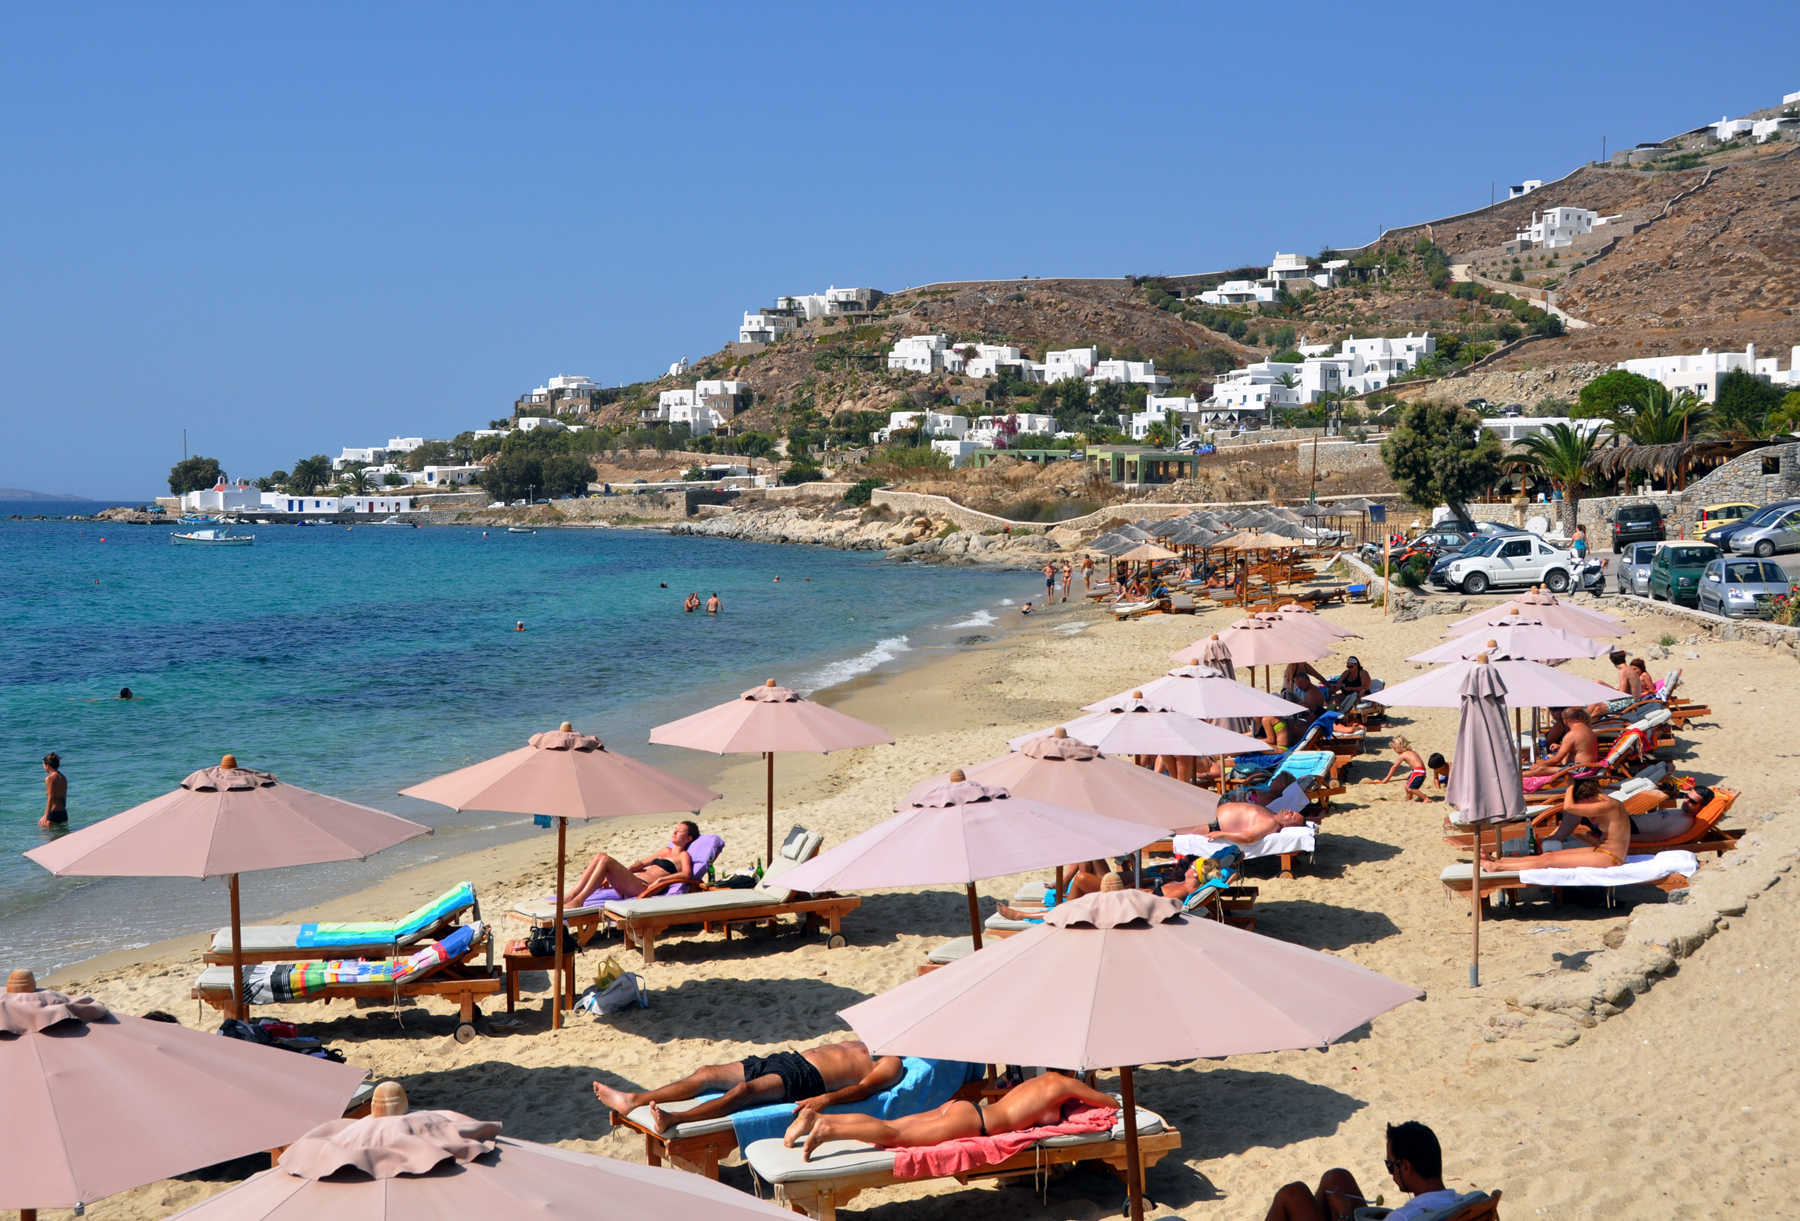 Mykonos, a party island or shoppers' paradise?